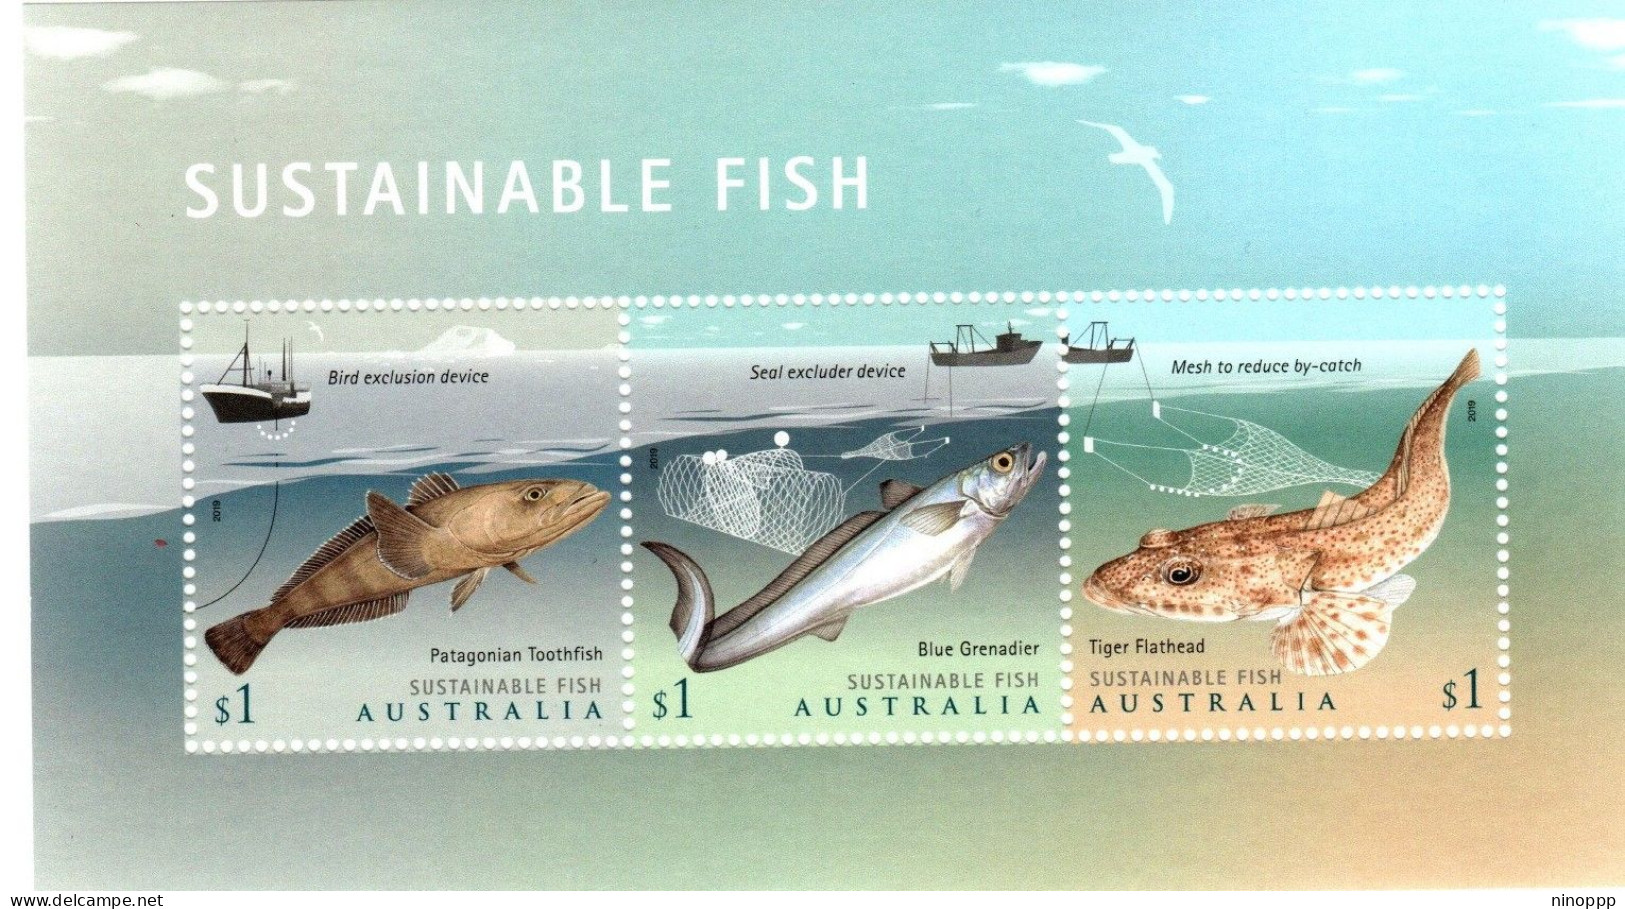 Australia ASC 3639 MS 2019 Sustainable Fish, Miniature Sheet,mint Never Hinged - Mint Stamps